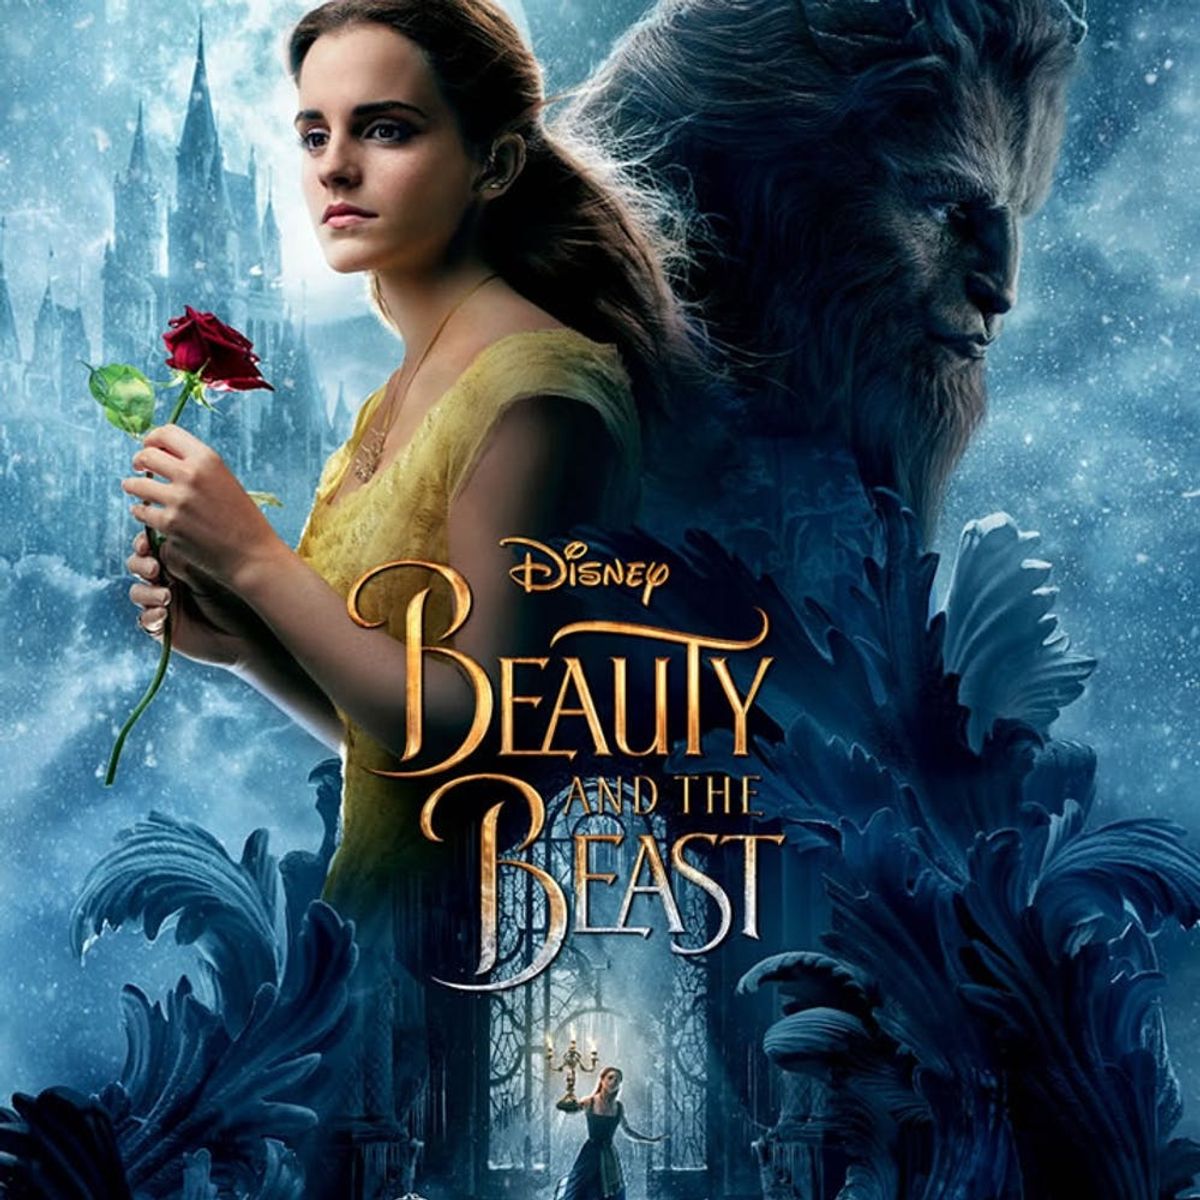 Ariana Grande and John Legend’s “Tale As Old As Time” from Beauty and the Beast Will Give You Chills